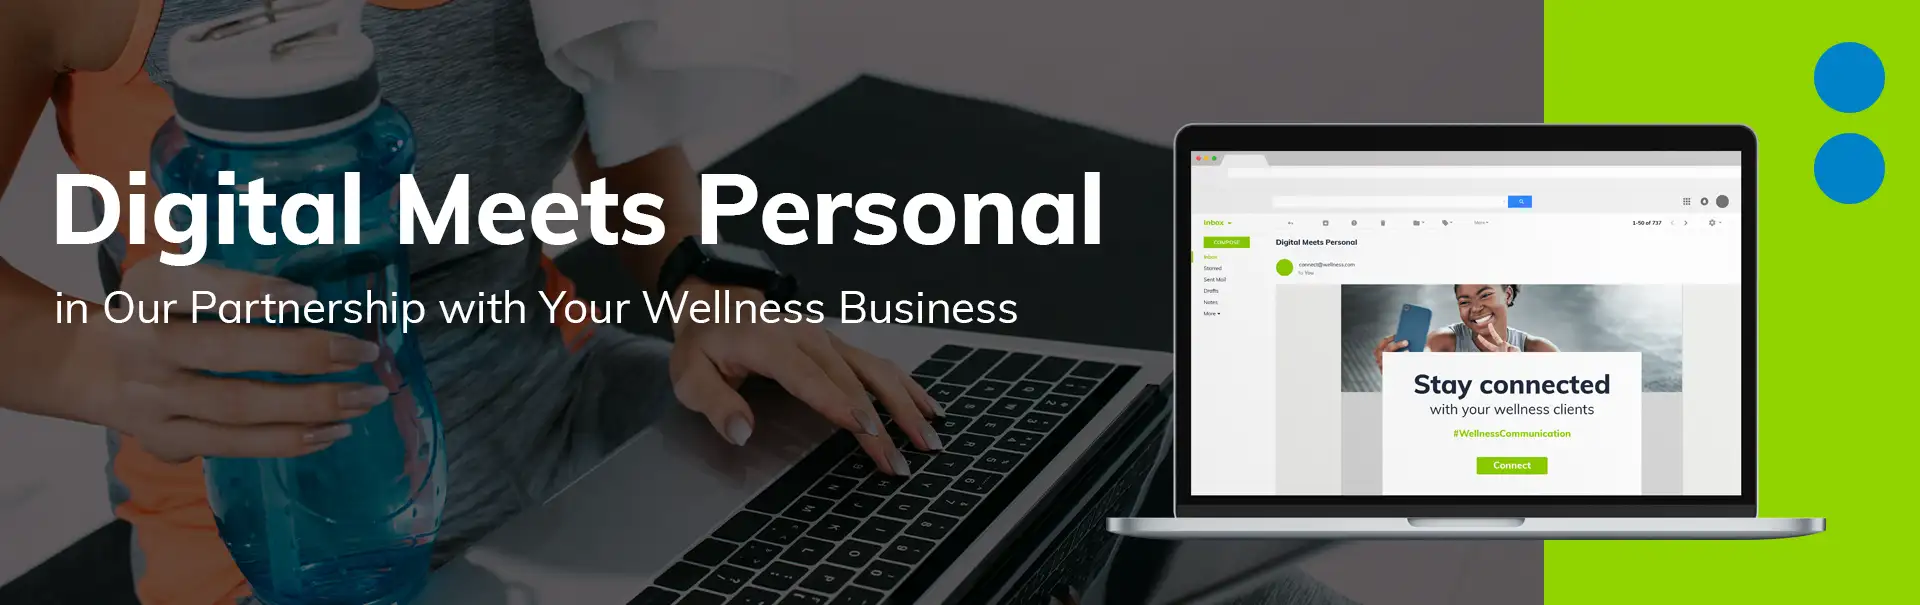 Wellness Industry Landing Page Banner | Everlytic | Campaign - Wellness Industry